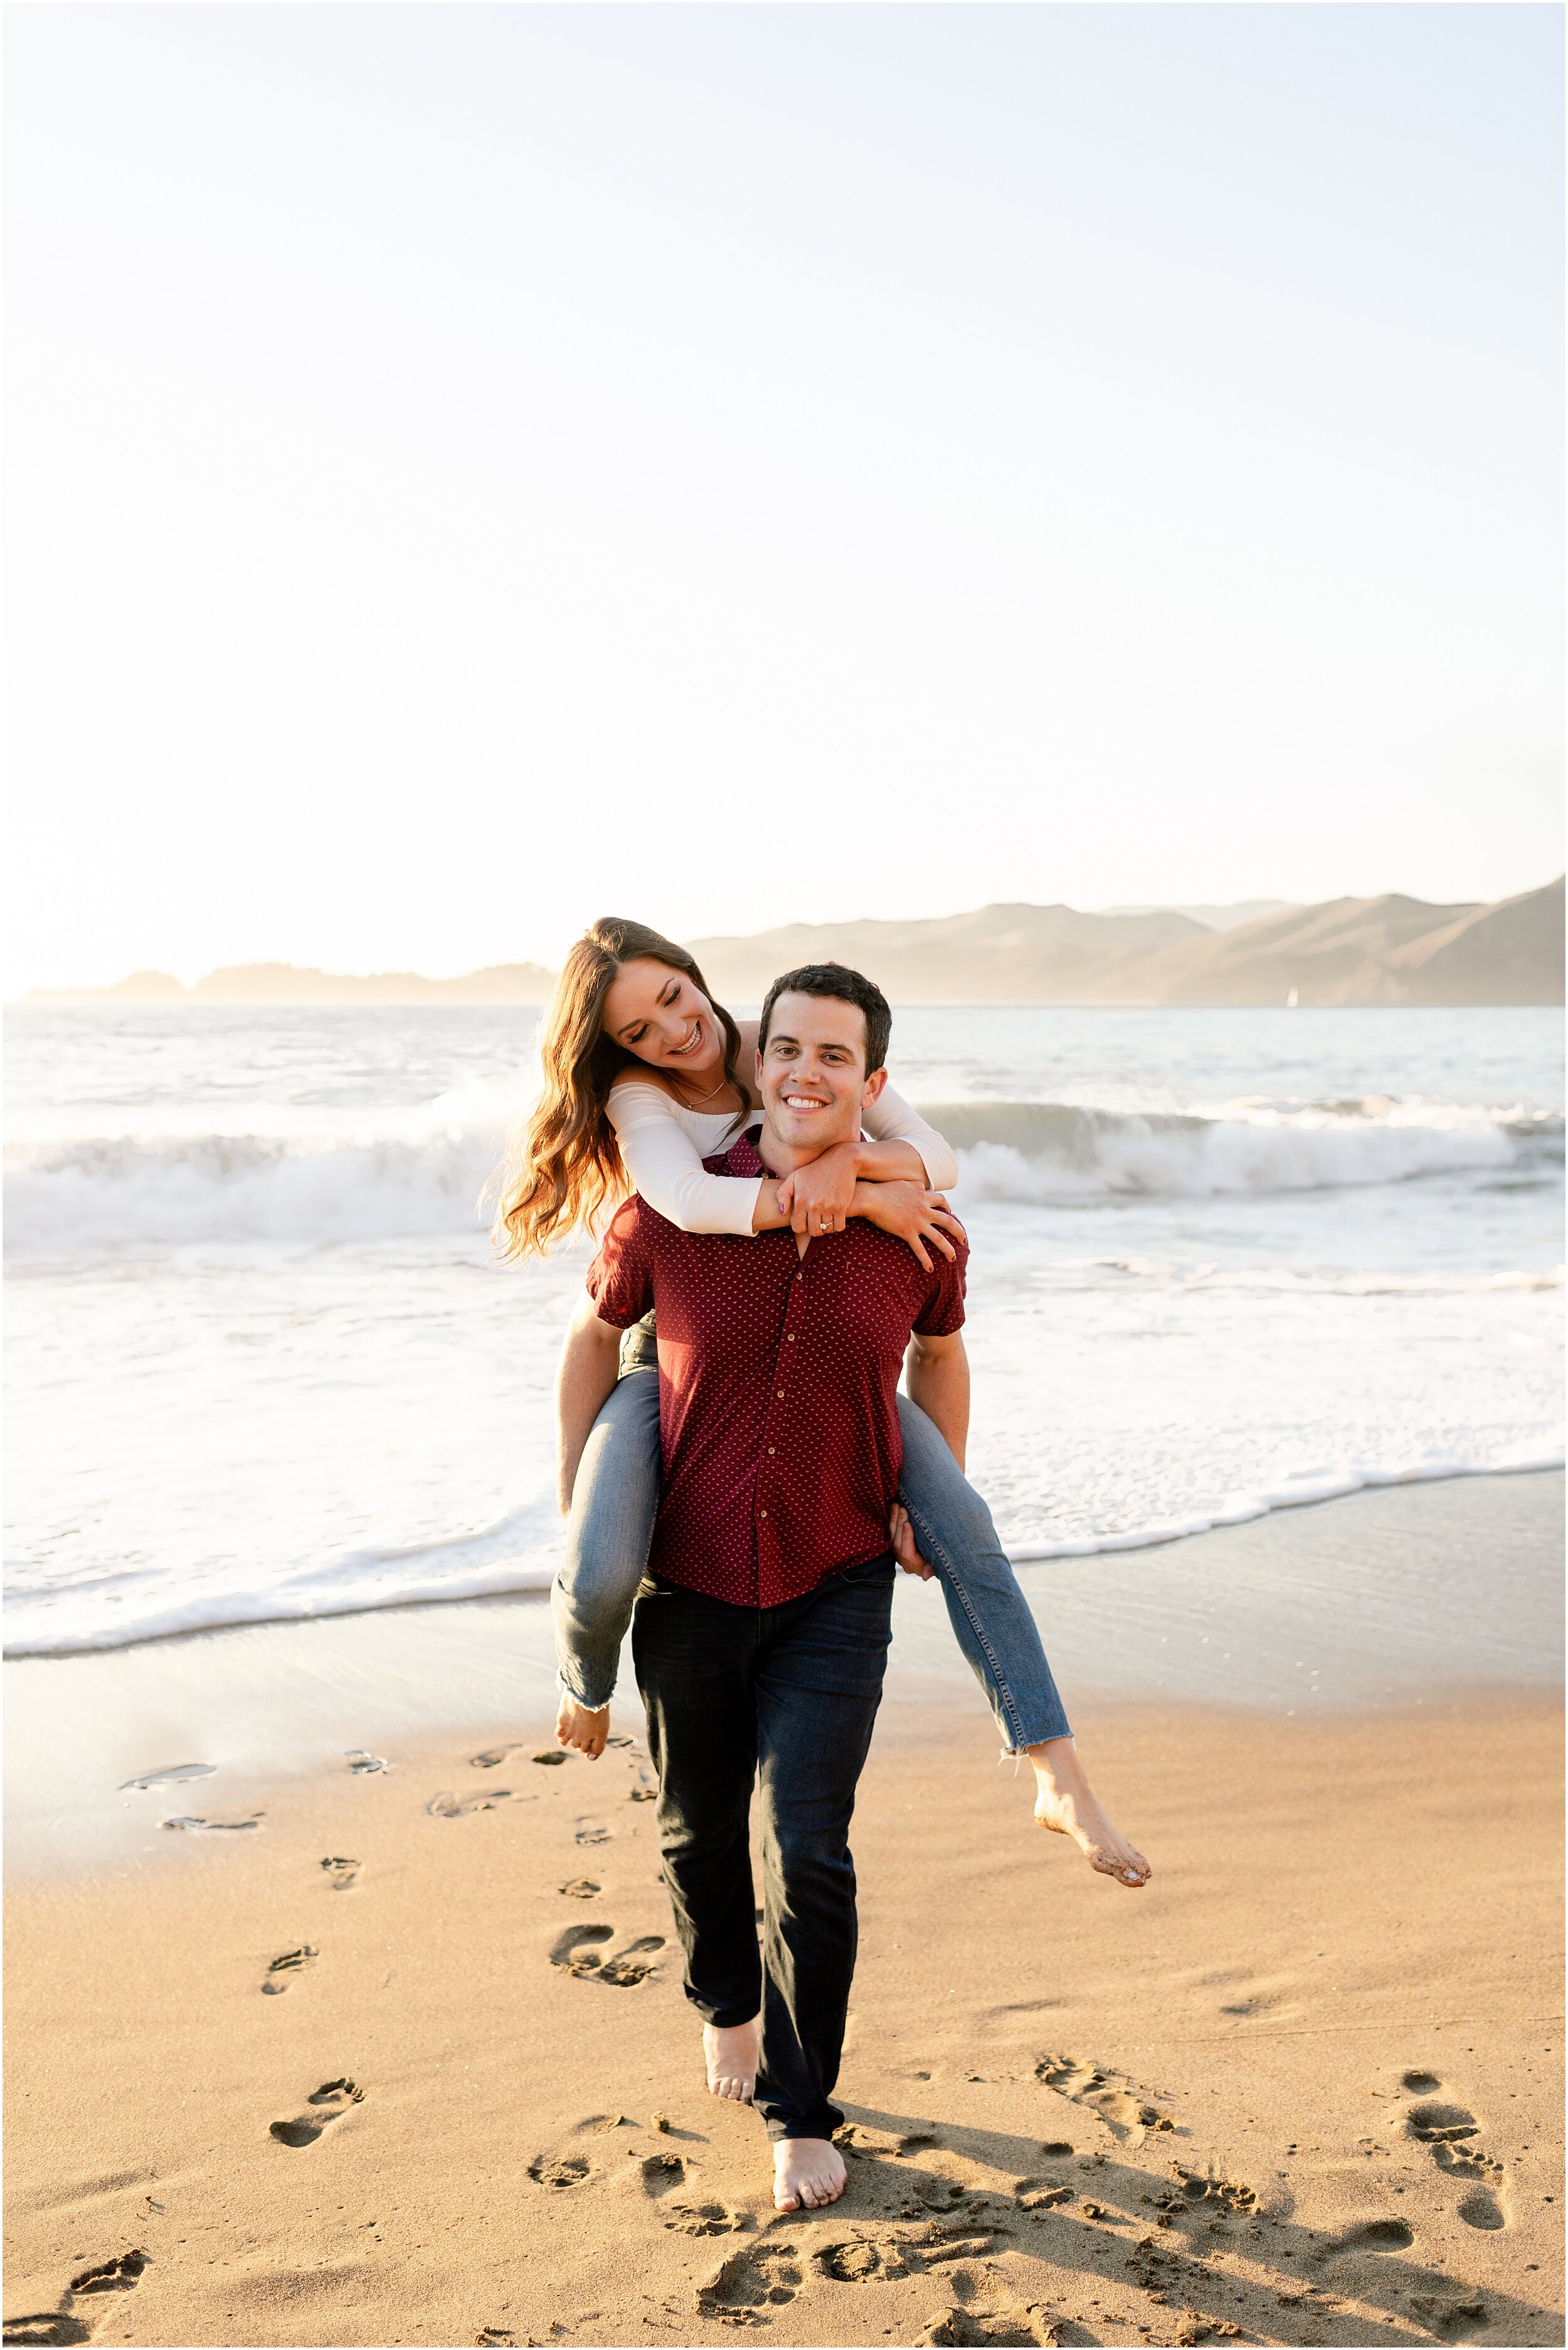 hannah leigh photography Baker Beach, Lovers Lane. Palace of Fine Arts Engagement Session San Franscico, CA_4851.jpg